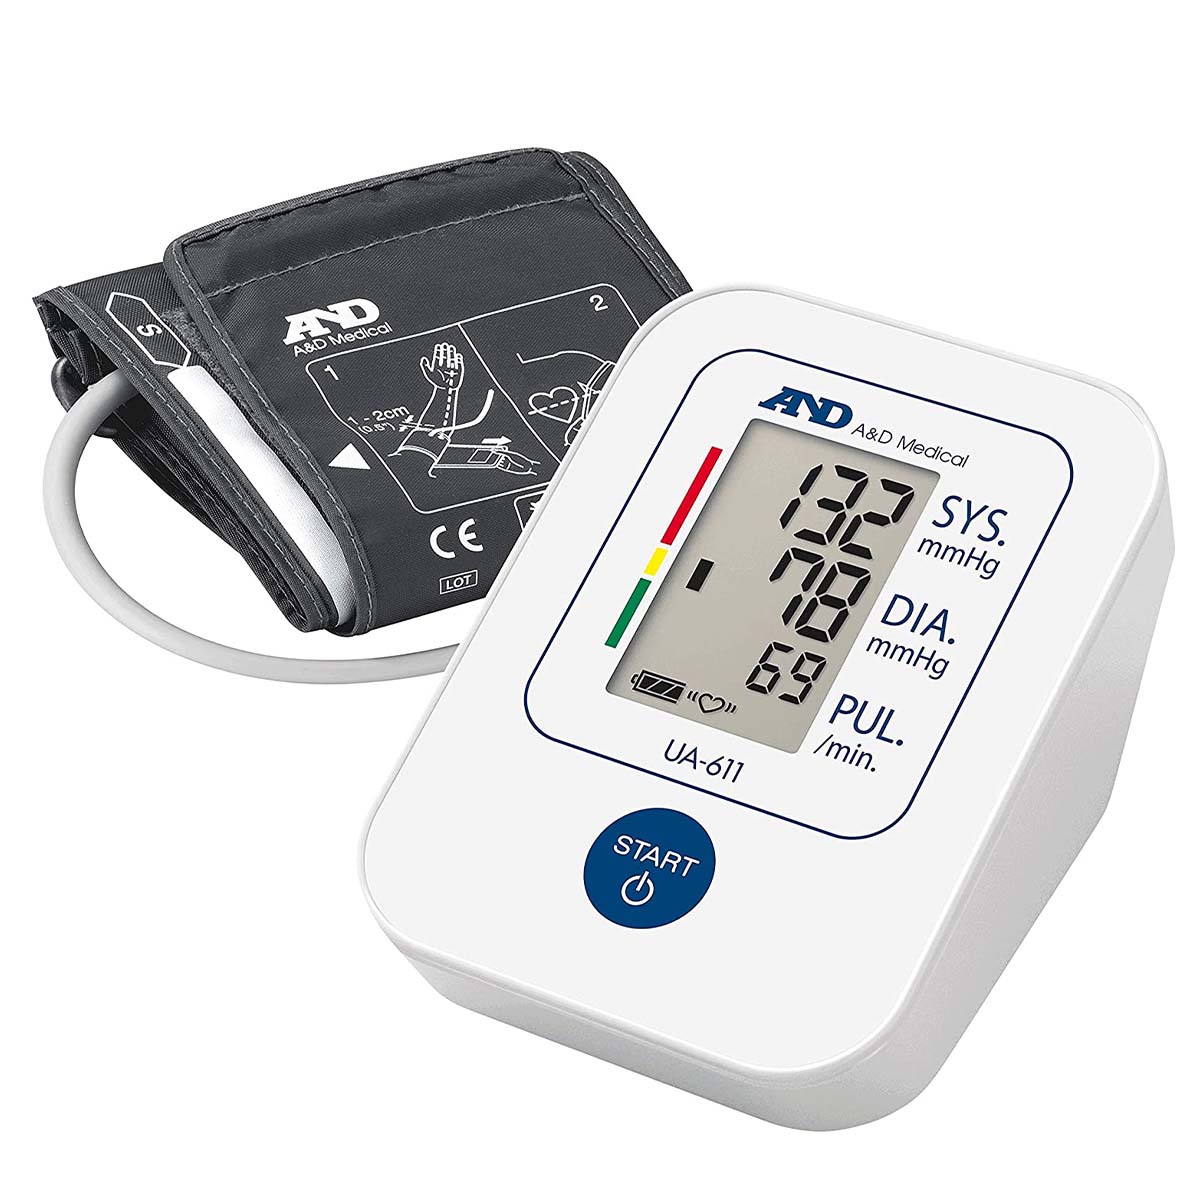 AND Medical UA-611 Blood Pressure Monitor, 1 Piece